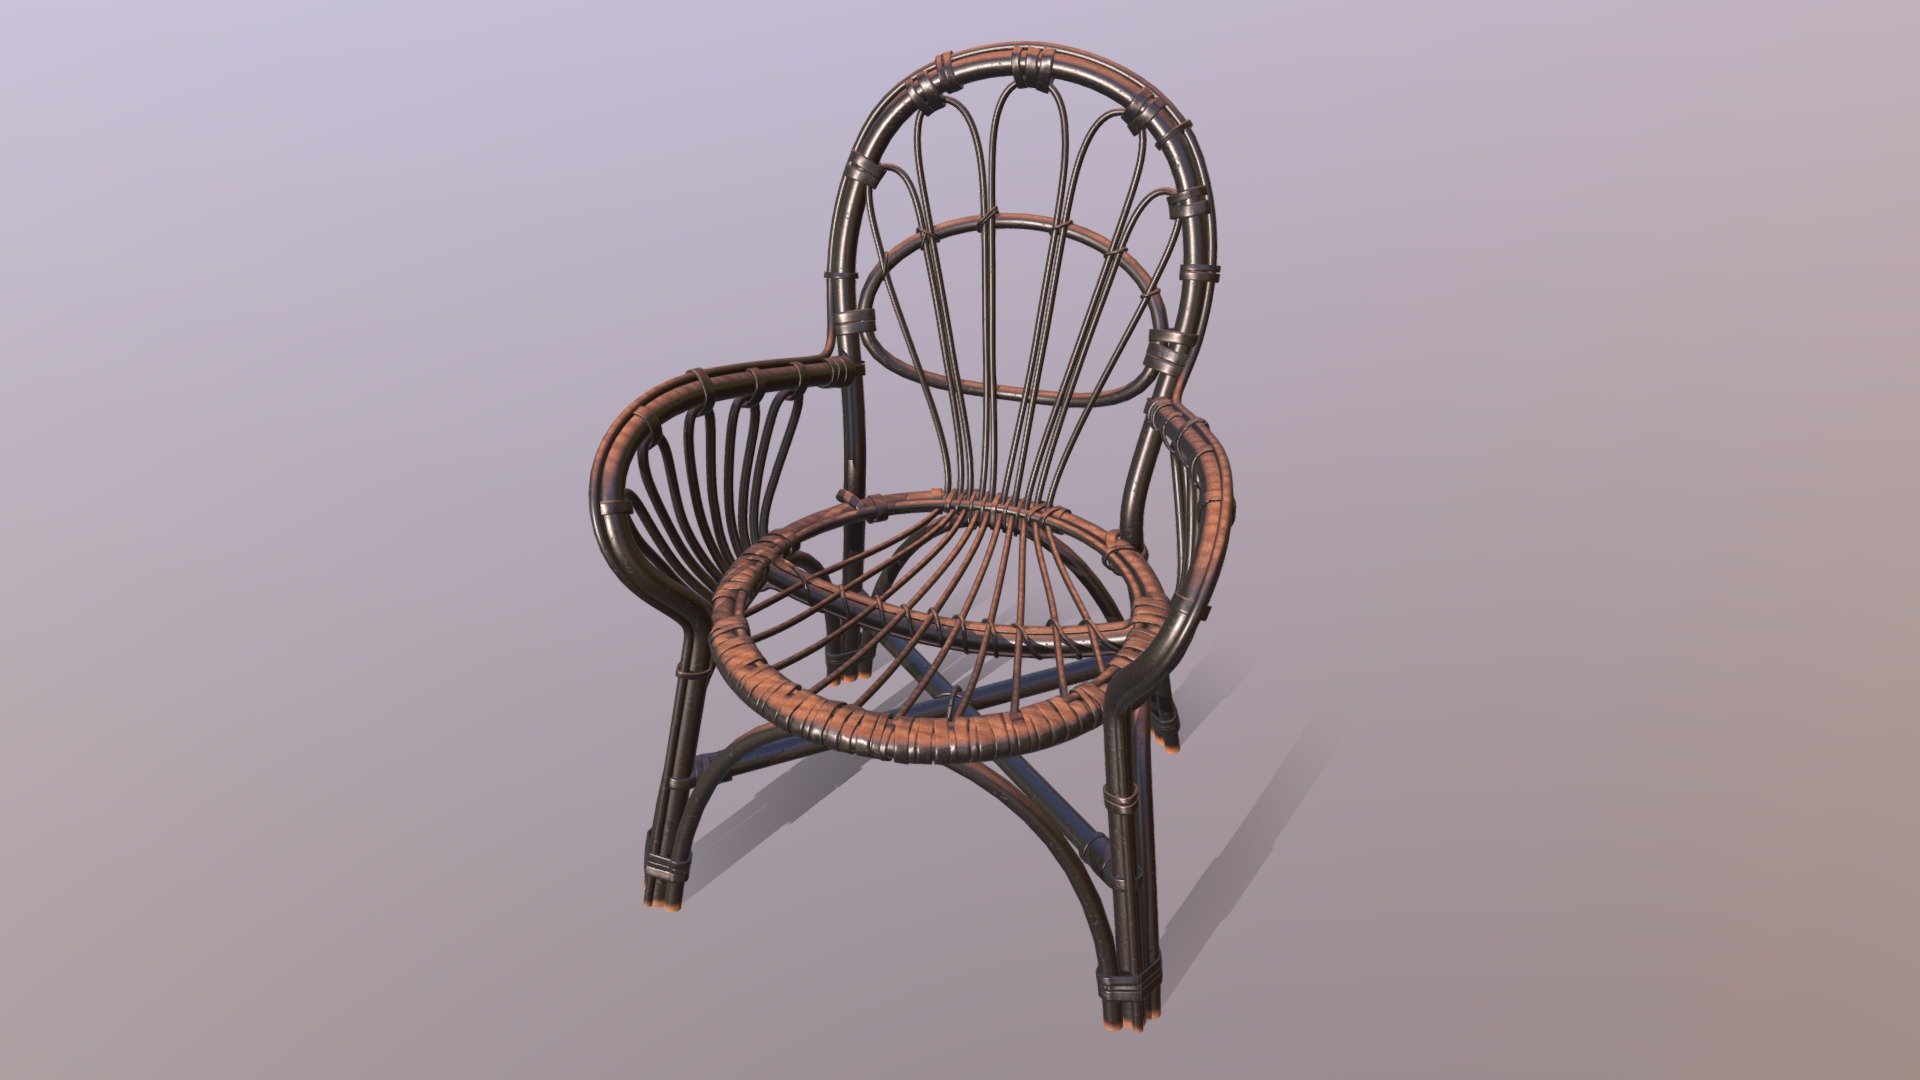 Highpoly rattan chair. 4096 textures.

we have this kinda old thing on our balcony, and it's so sad that someone has painted it black. However it is still beutiful. 

Made with Blender and Quixel 3d model